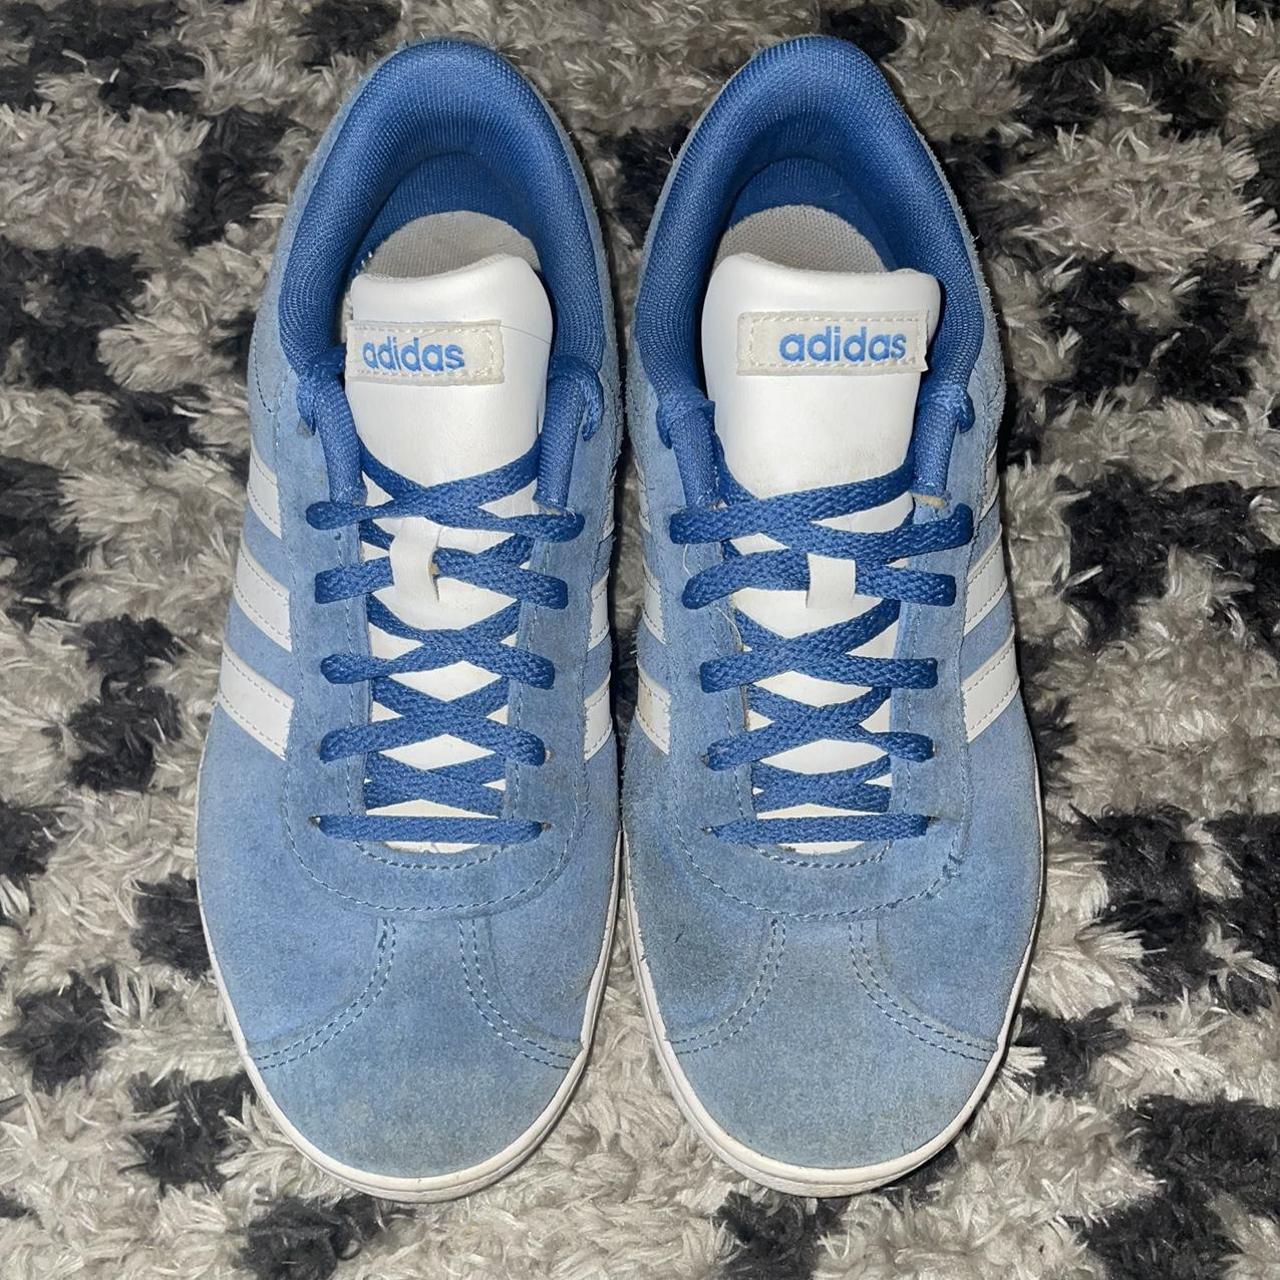 Adidas Women's Blue and White Trainers (2)